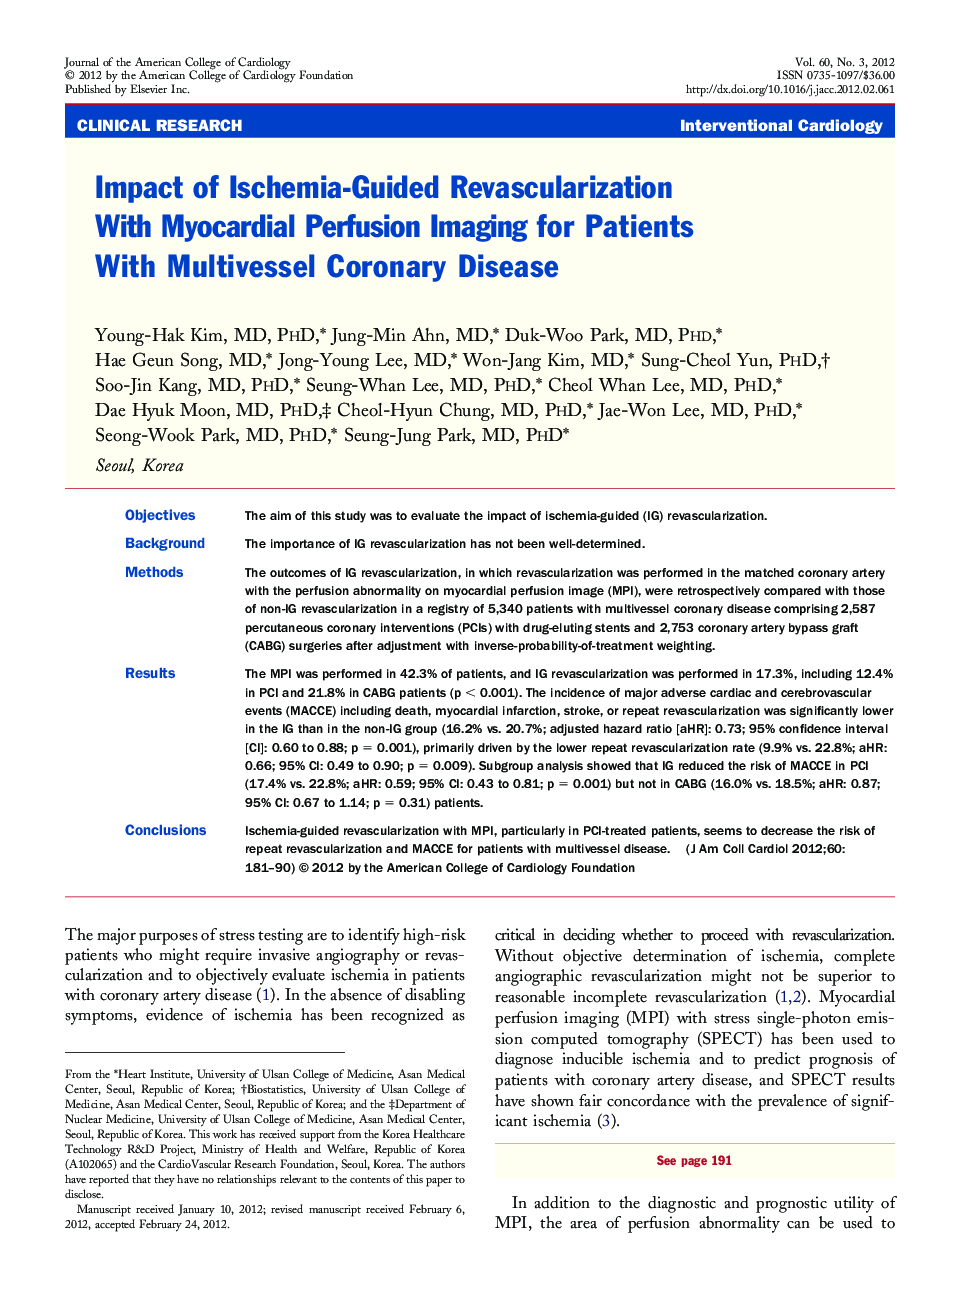 Impact of Ischemia-Guided Revascularization With Myocardial Perfusion Imaging for Patients With Multivessel Coronary Disease 